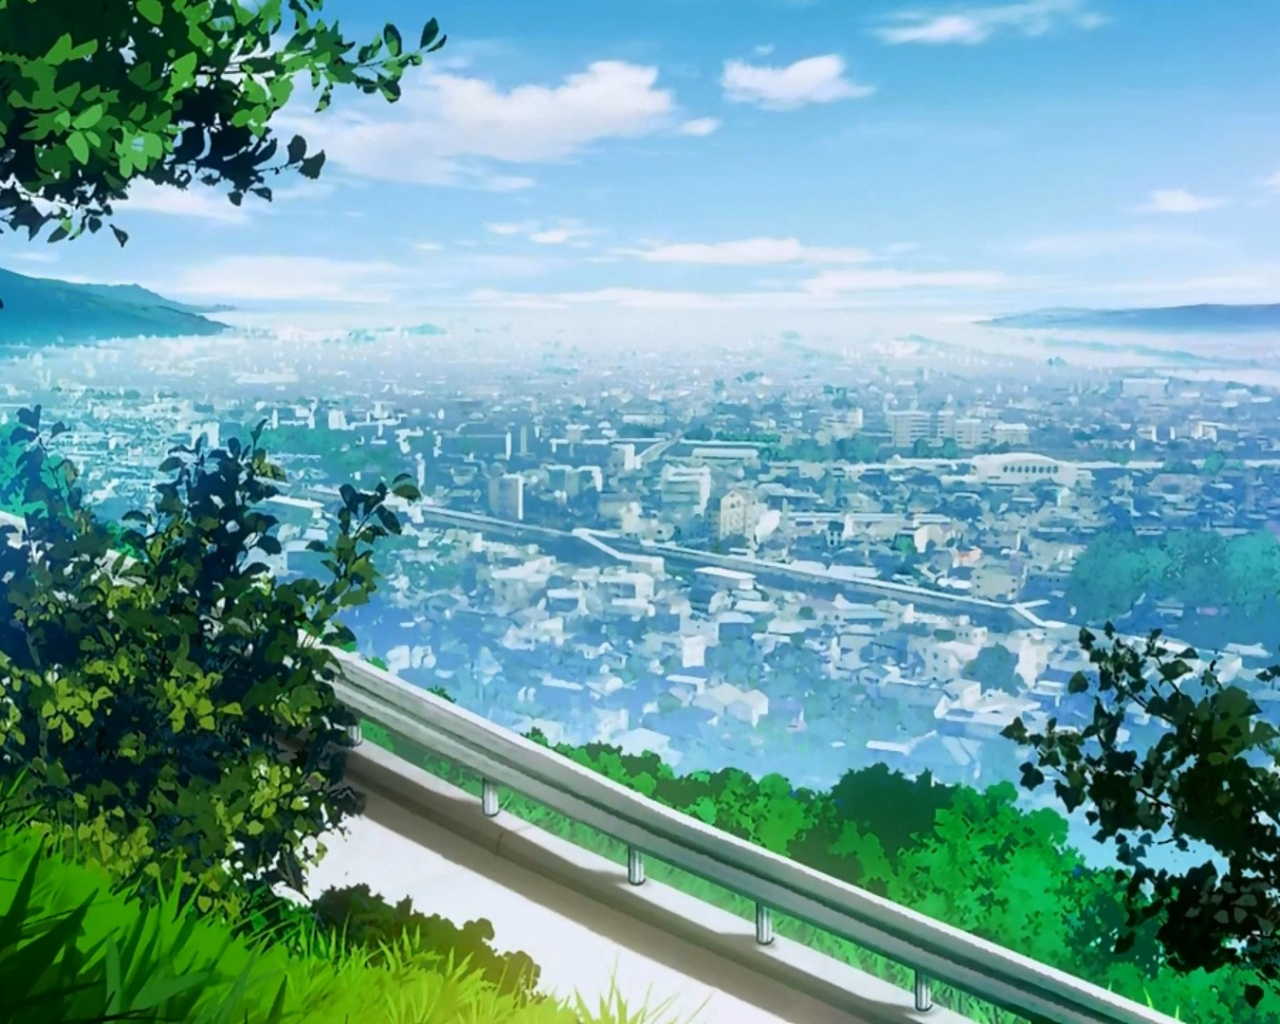 Free download Anime scenery wallpaper 1920x1080 HQ WALLPAPER 38879 [1920x1080] for your Desktop, Mobile & Tablet. Explore Anime Scenery Wallpaper. Scenery Wallpaper Background, HD Scenery Wallpaper